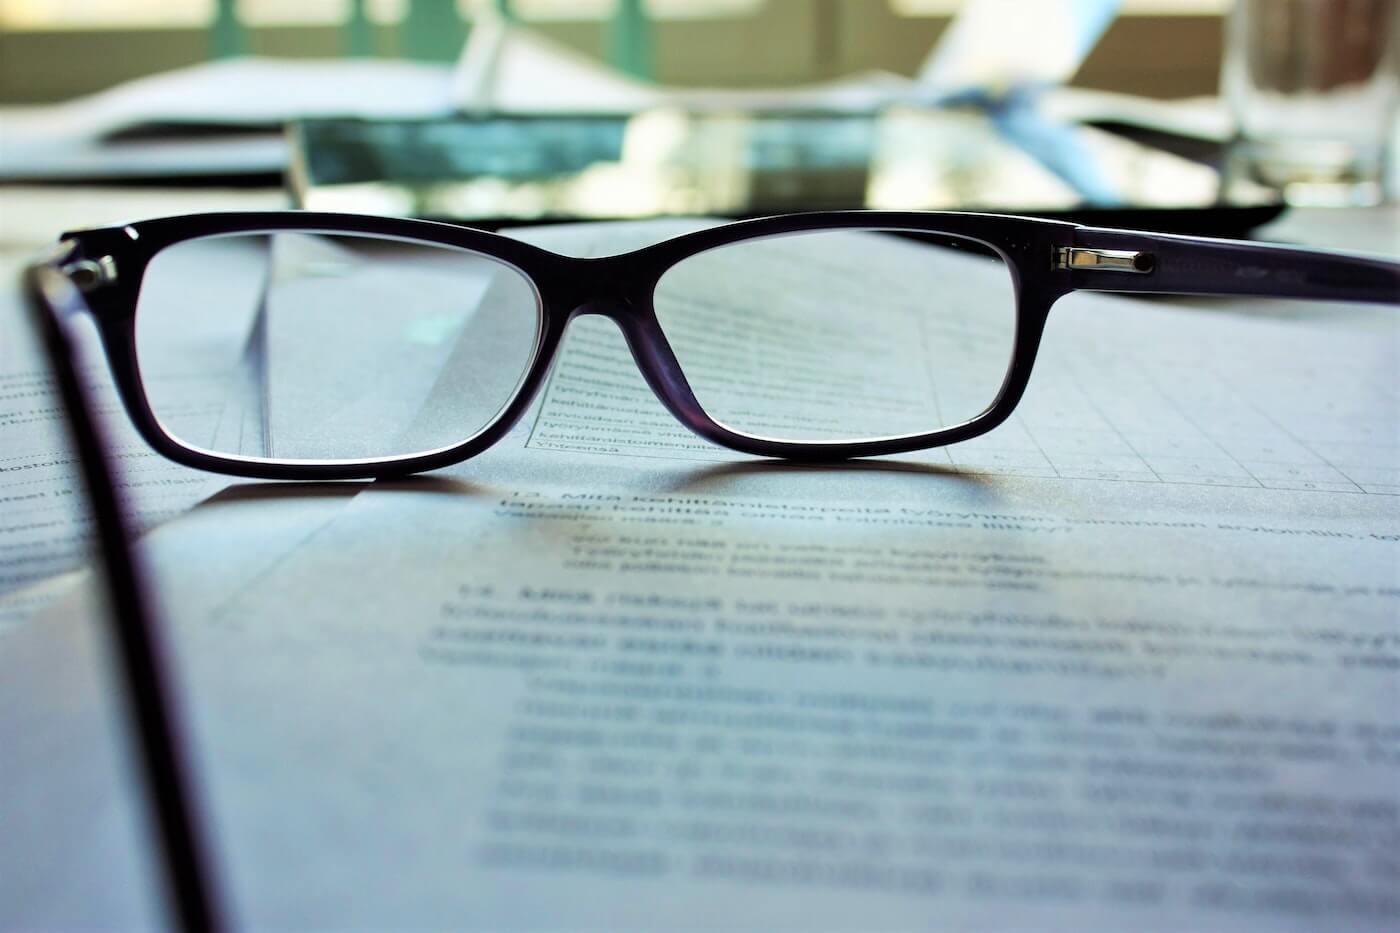 reading glasses sit on a stack of papers